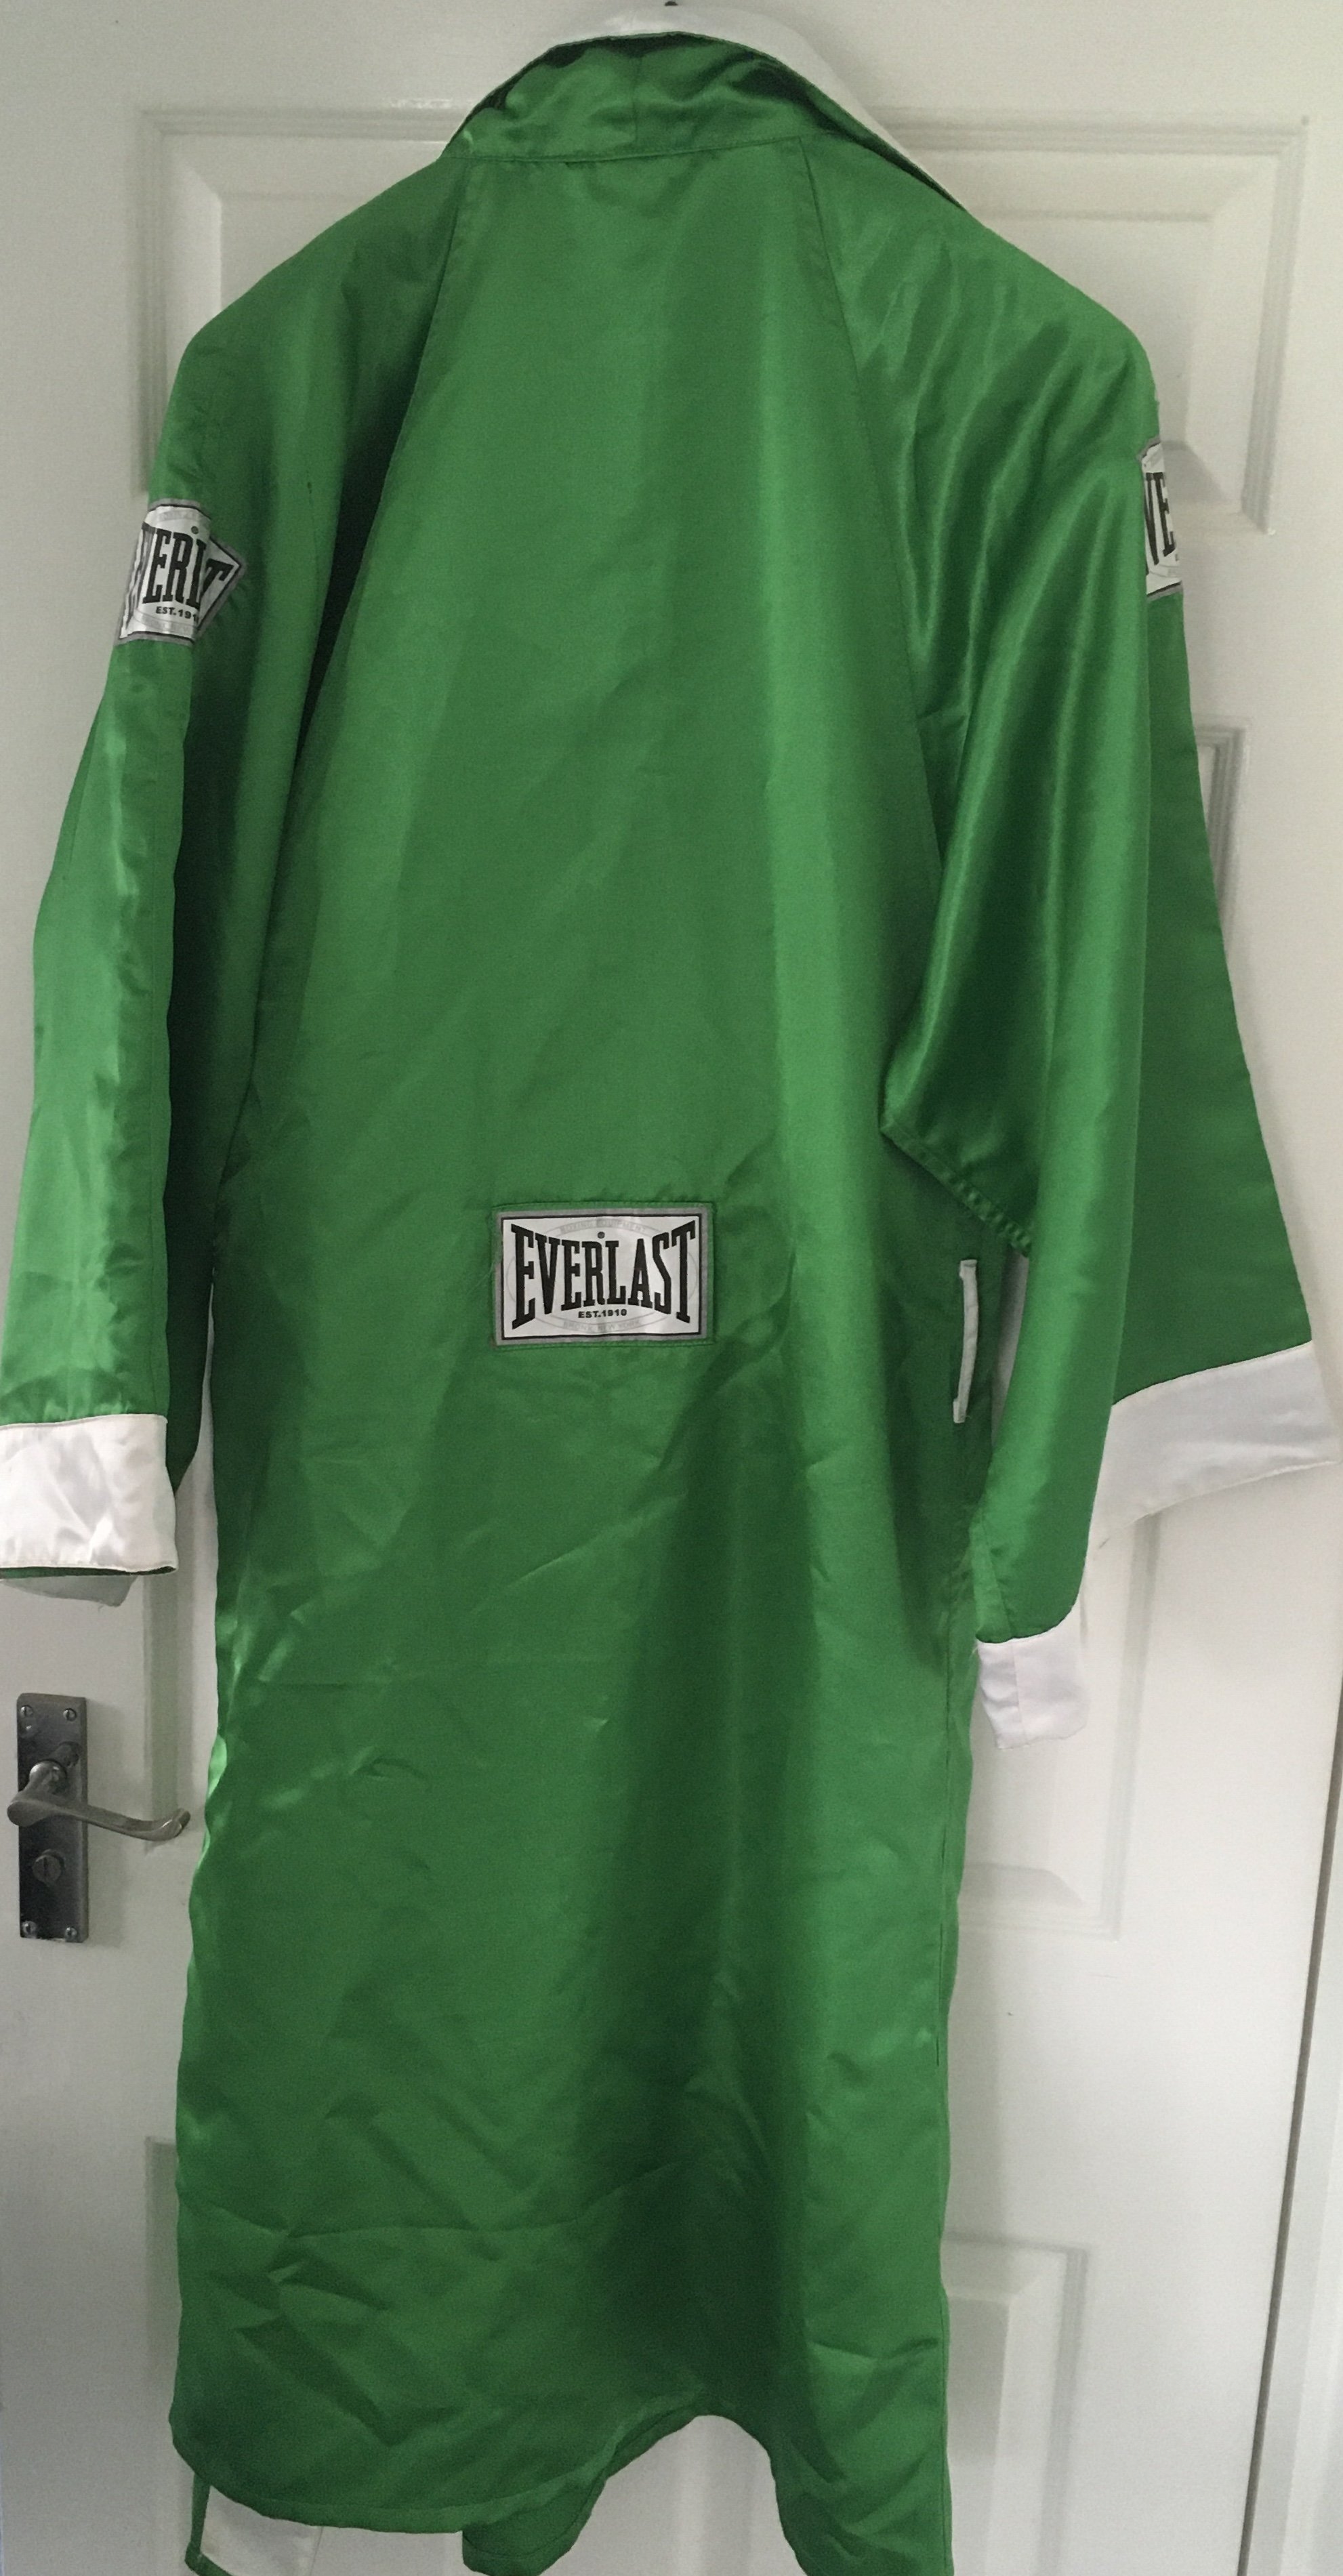 Joe Frazier Signed Boxing Gown: Everlast green lar - Image 3 of 4